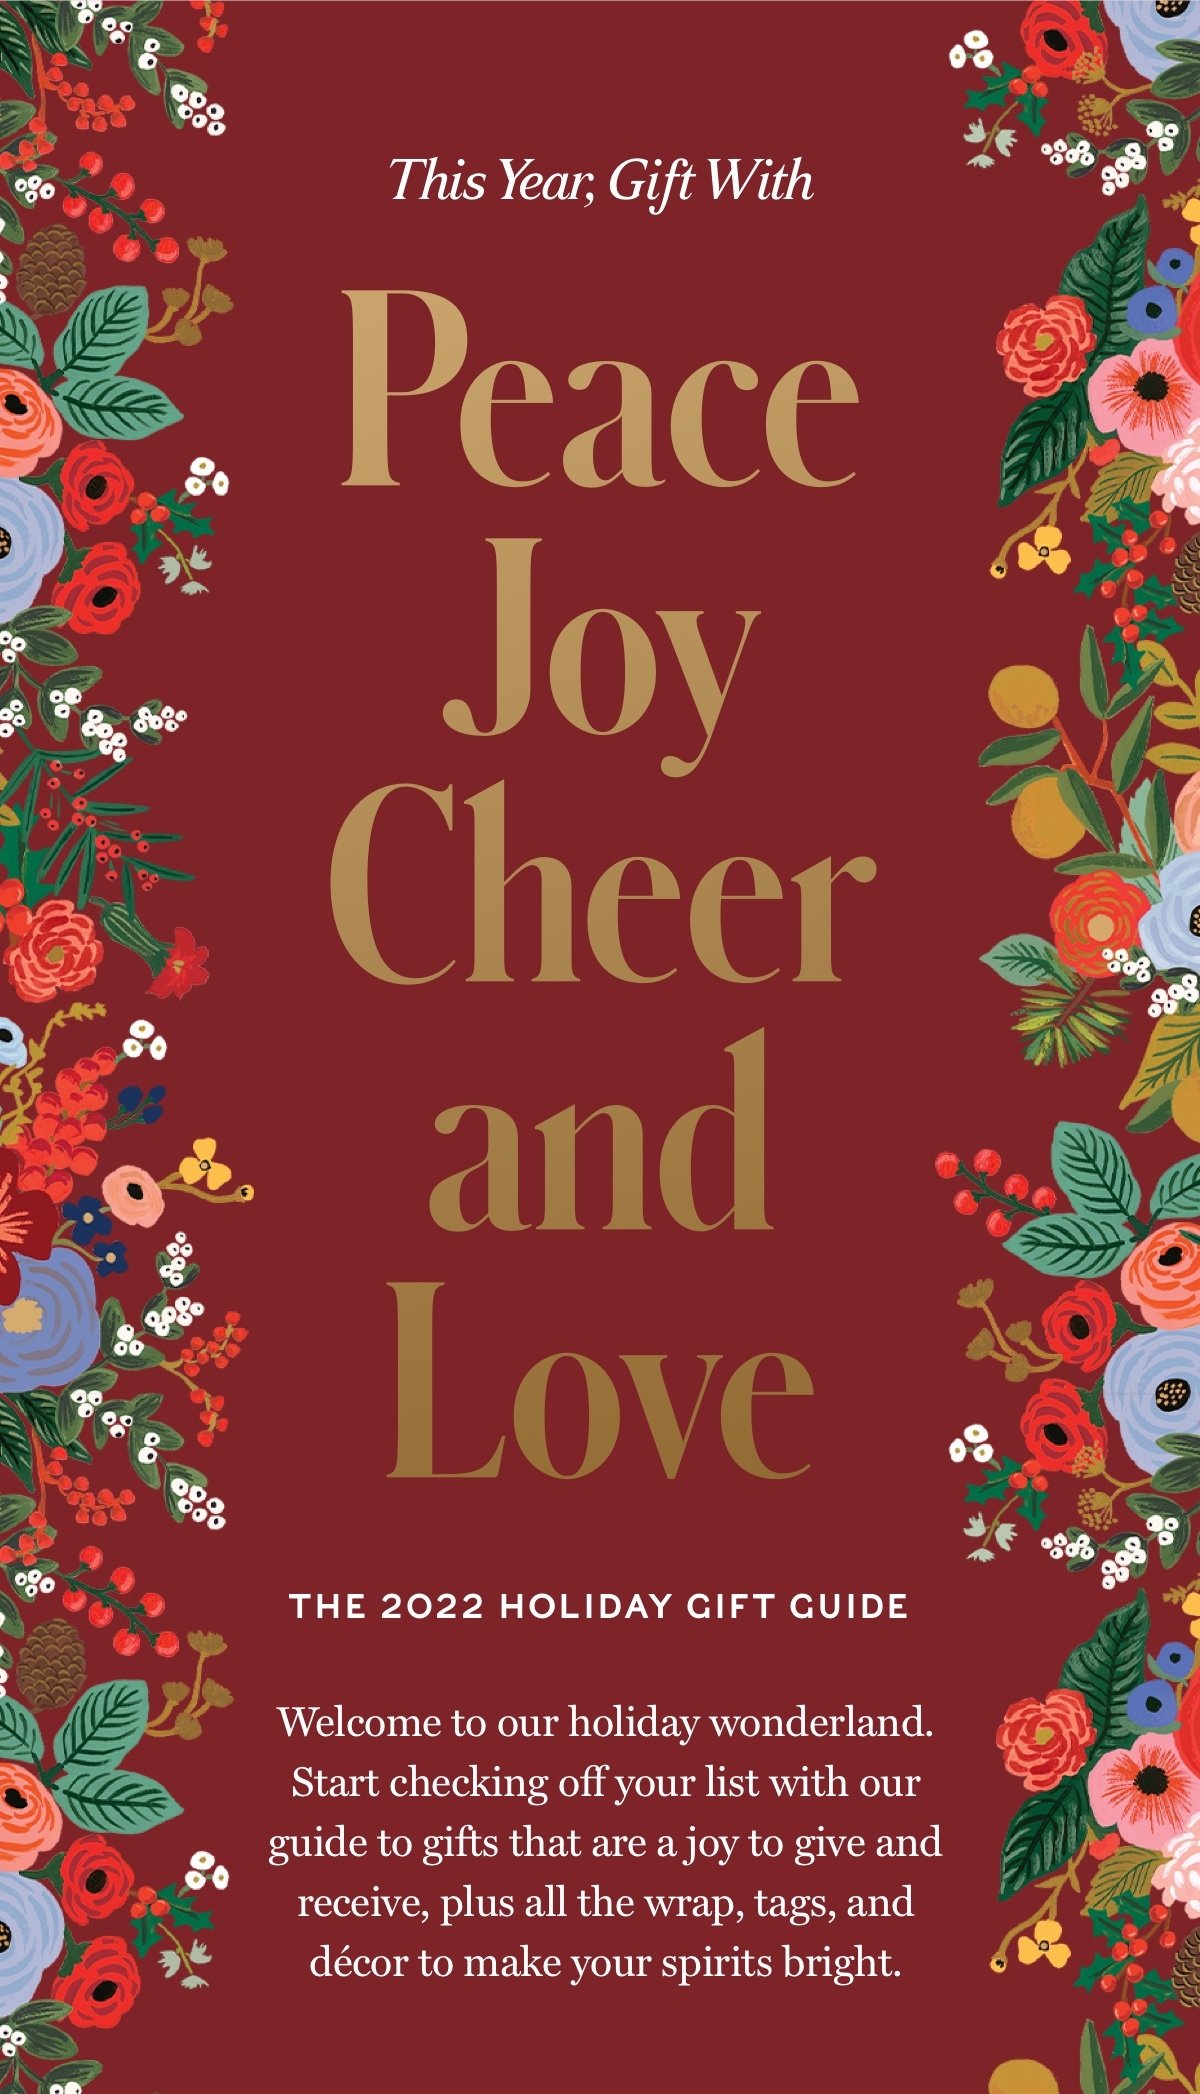 The 2022 Holiday Gift Guide